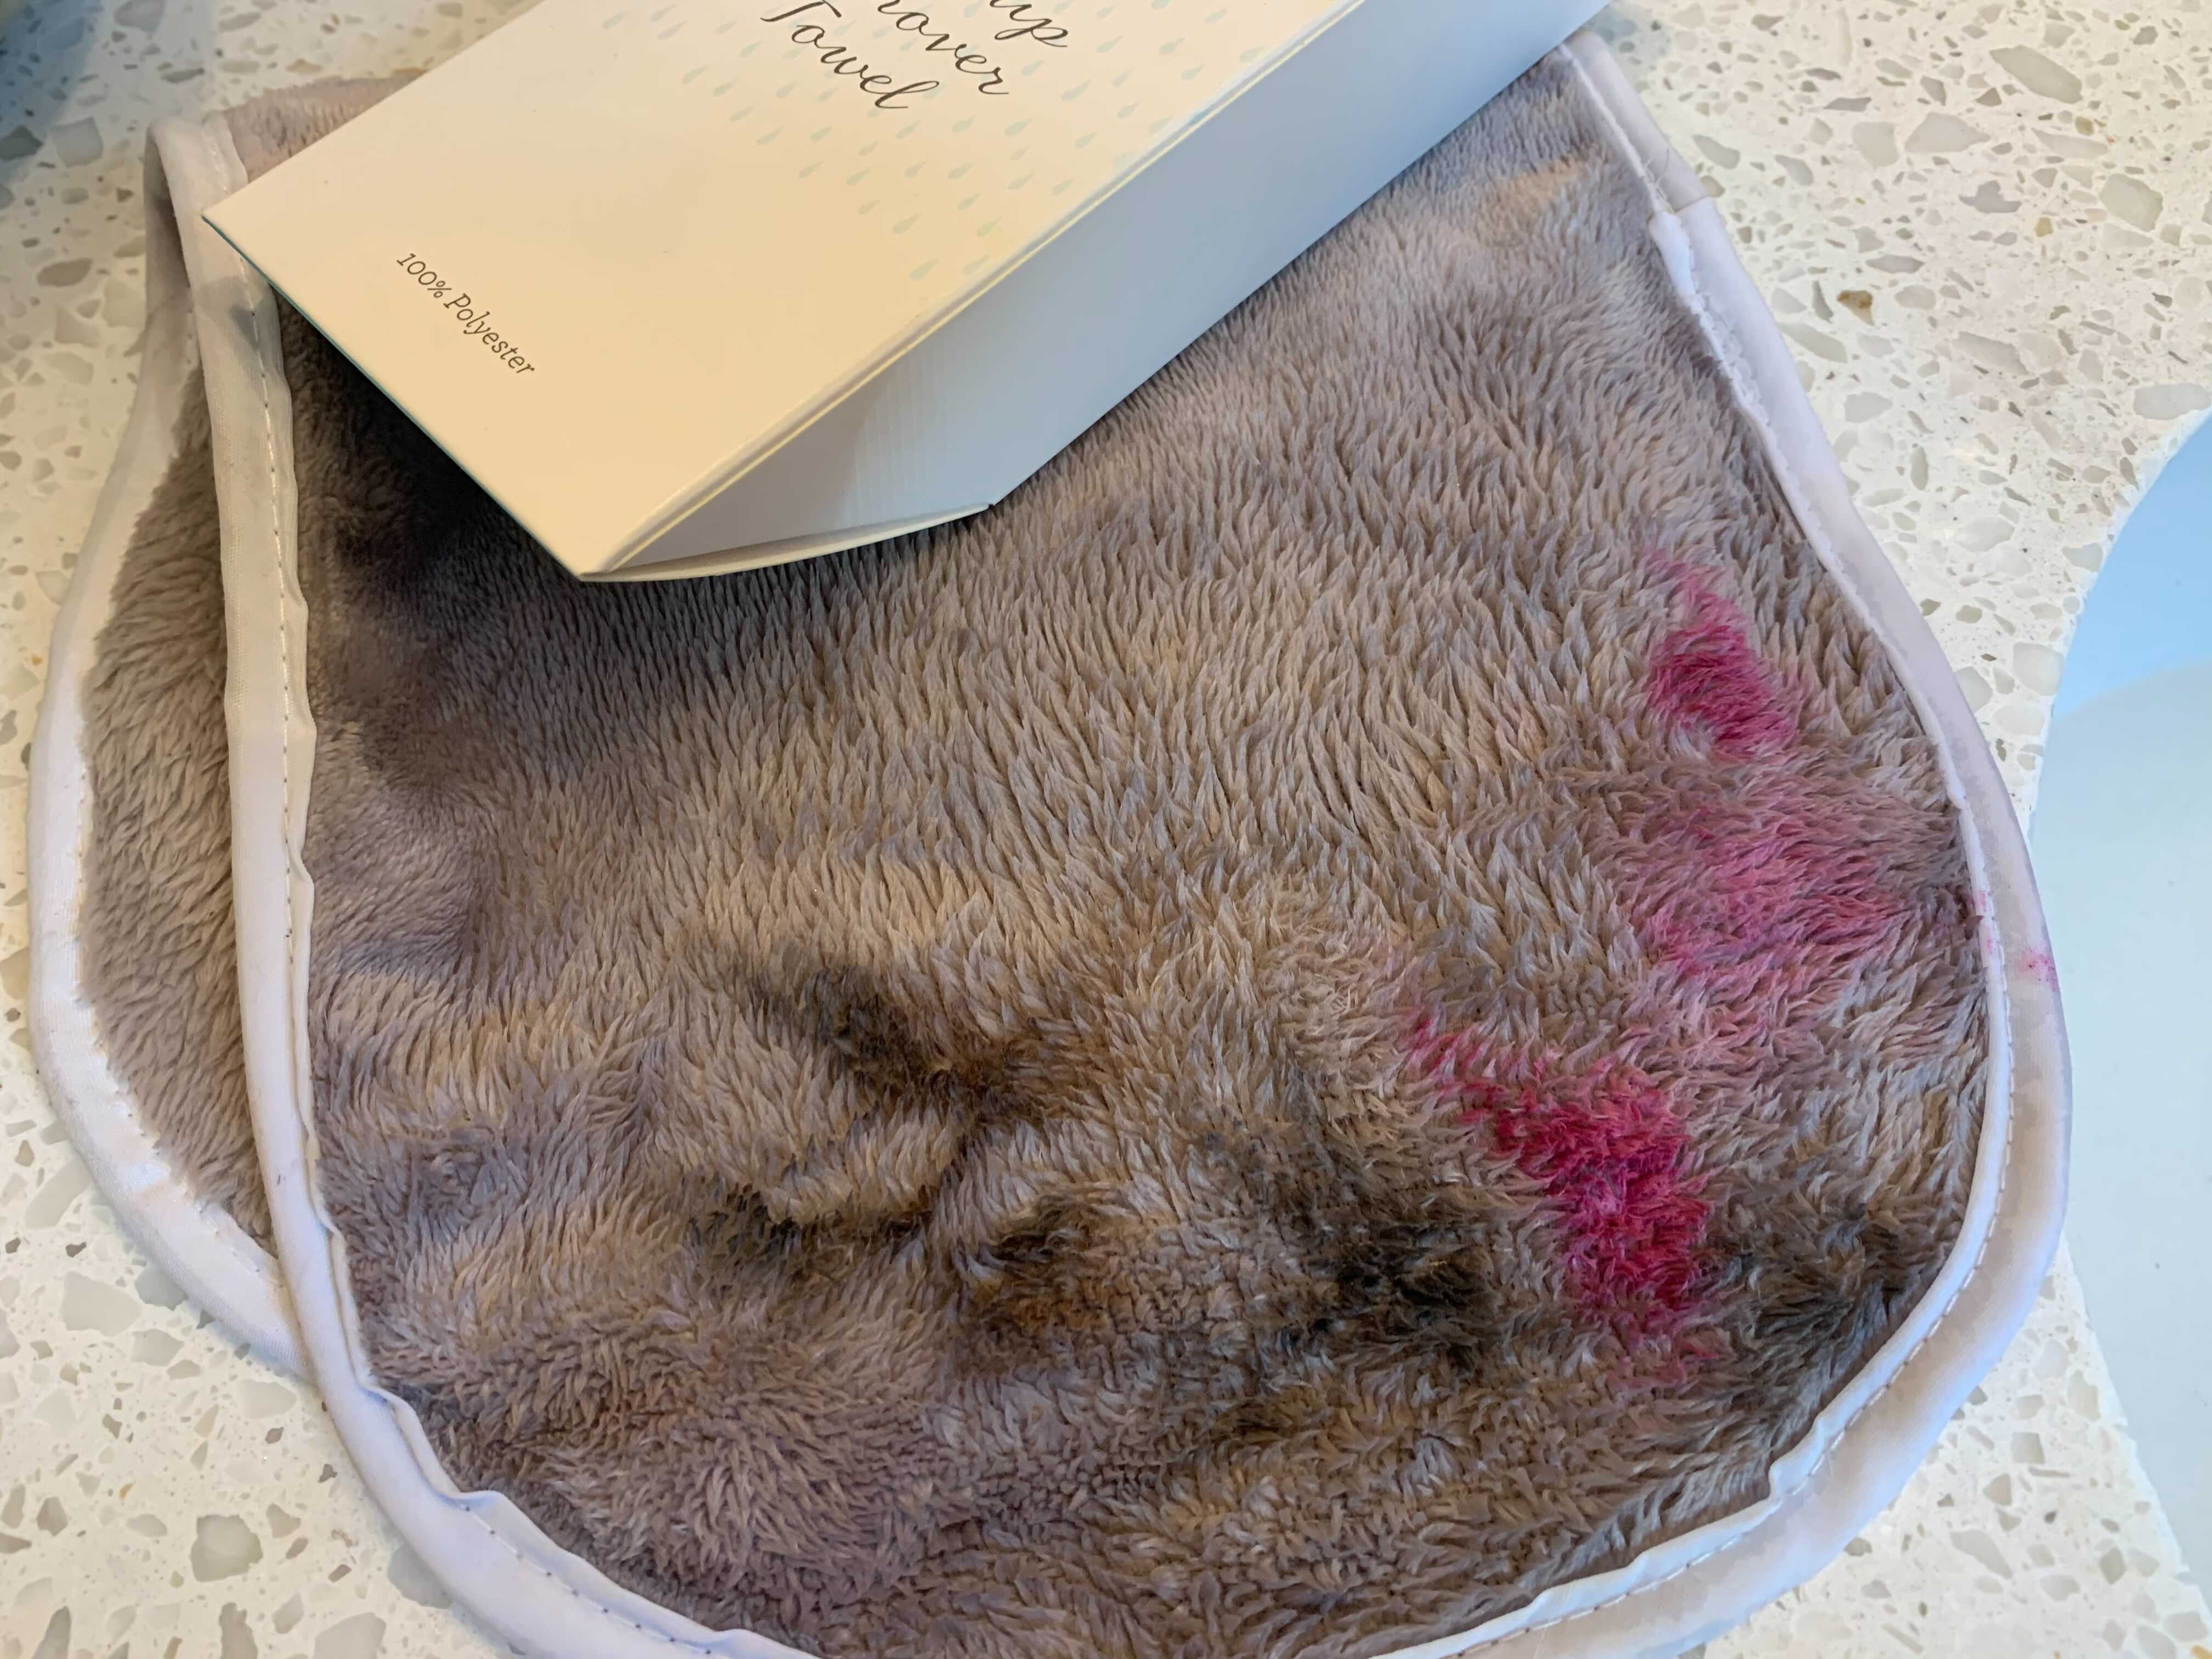 Photo of makeup remover towel with makeup on it.